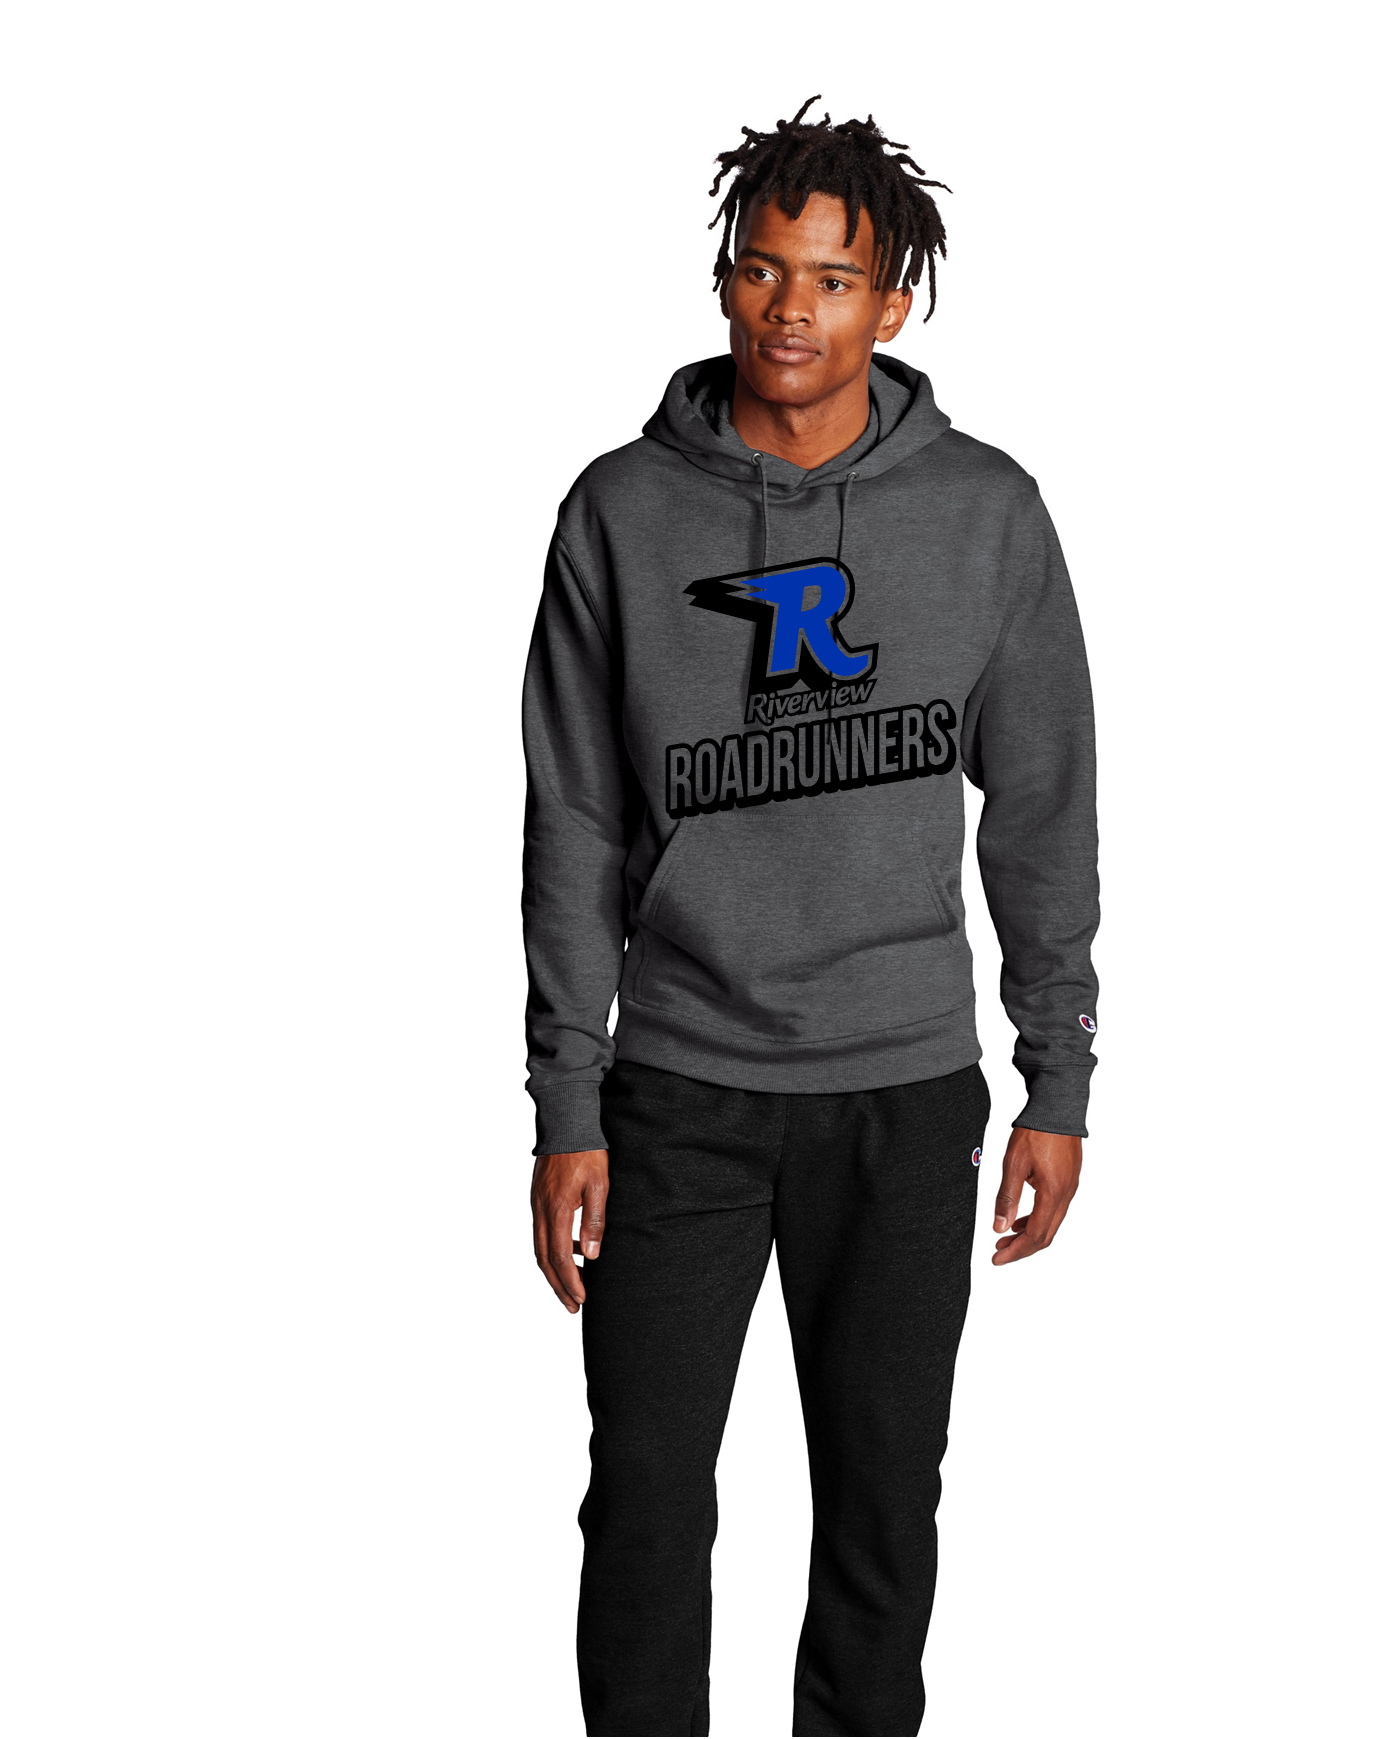 Riverview Roadrunner Charcoal Hoodie~ Youth/Adult